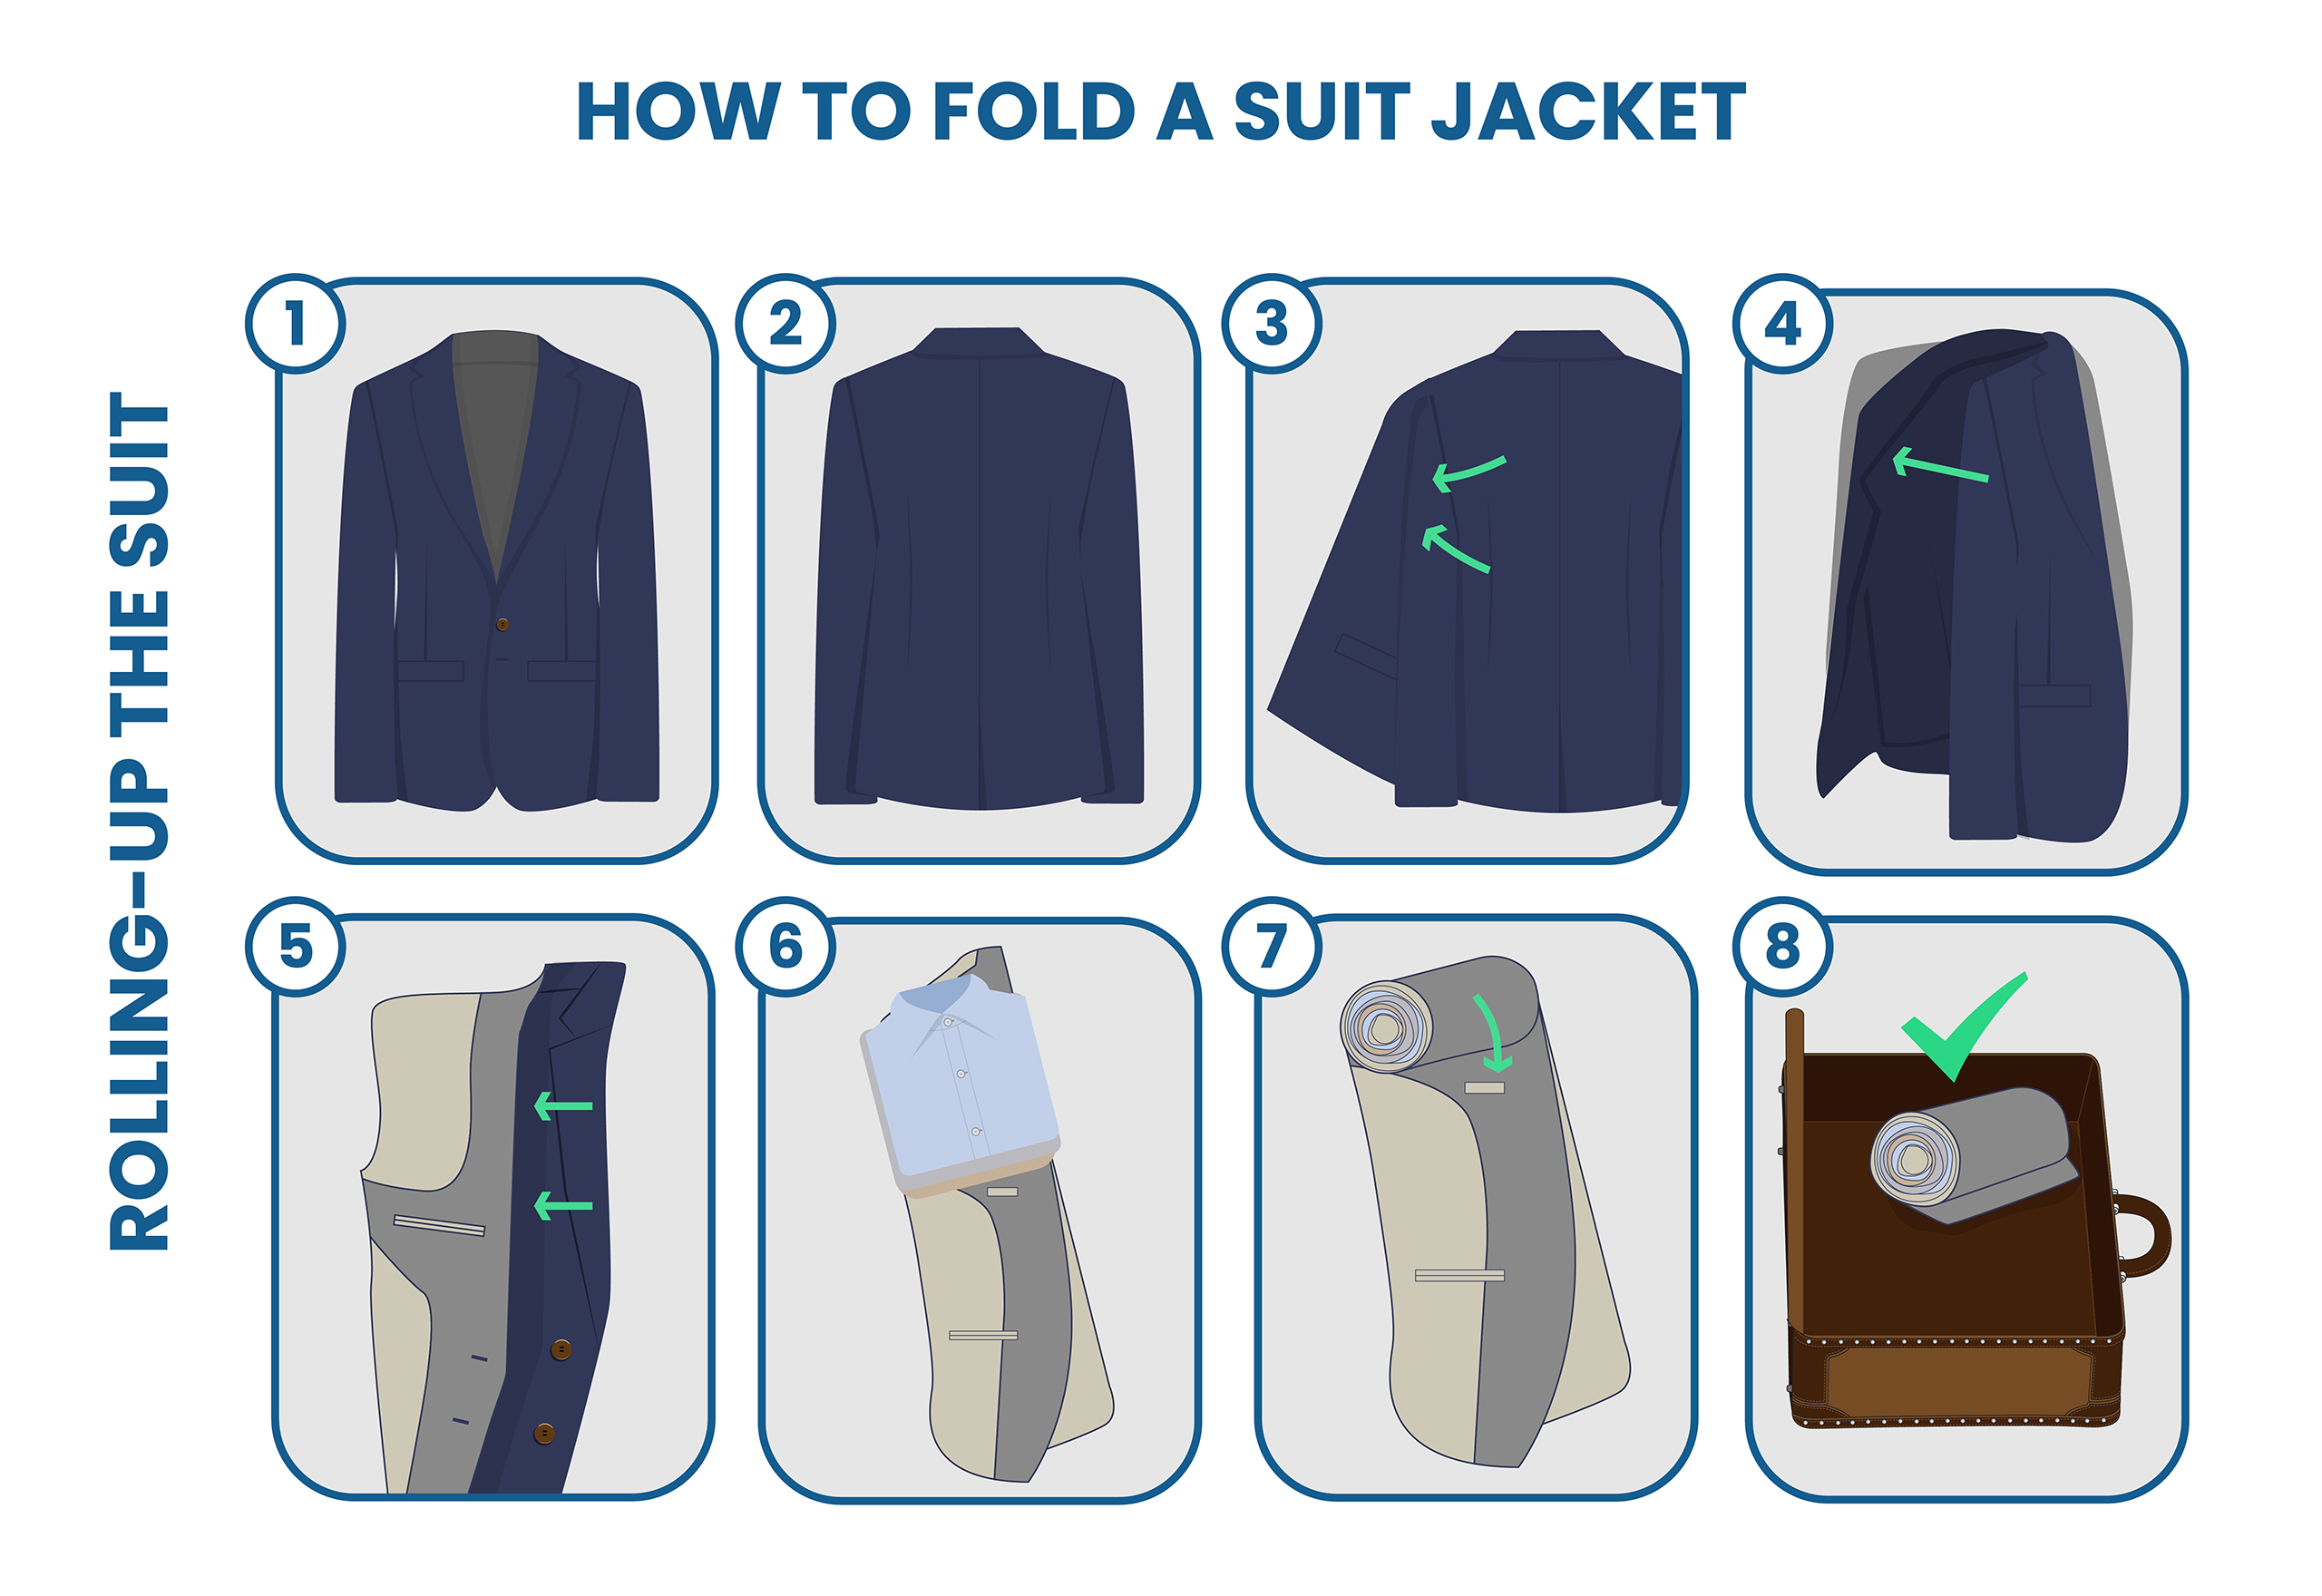 5 Easy Methods to Fold and Pack a Suit - Suits Expert